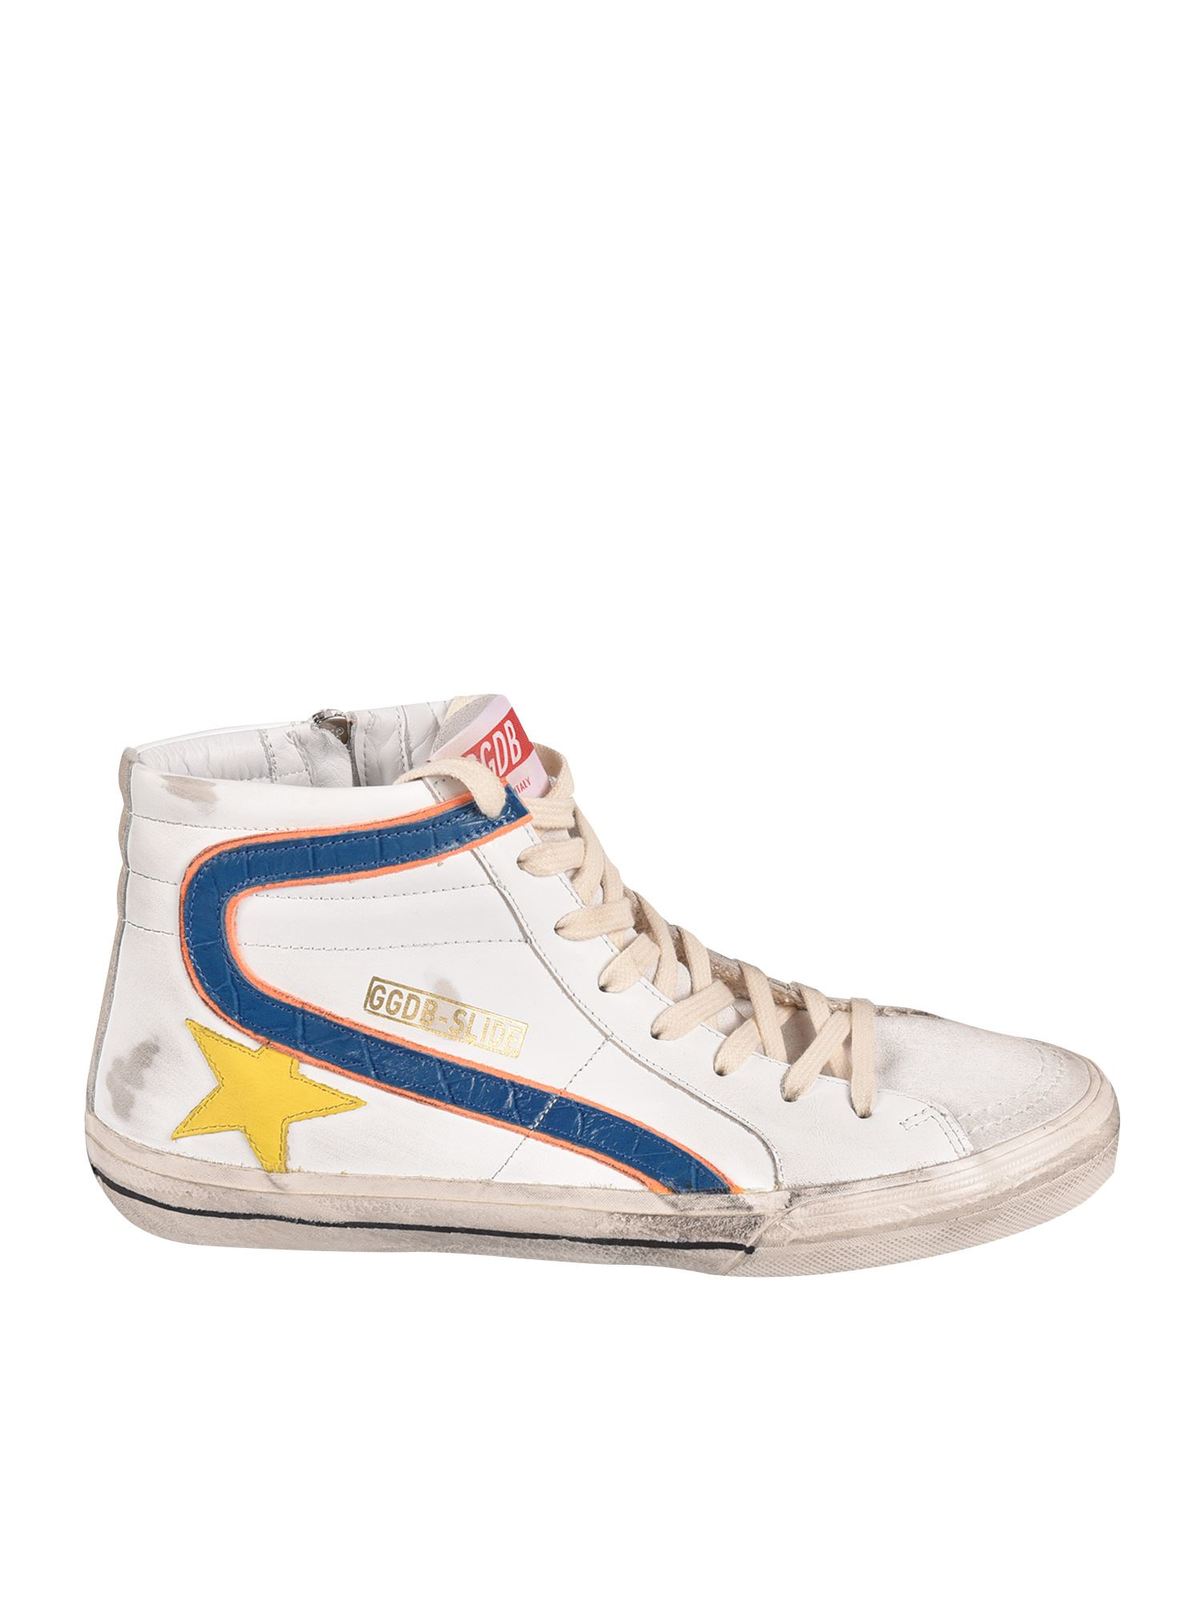 GOLDEN GOOSE SLIDE CLASSIC SNEAKERS IN WHITE AND BLUE